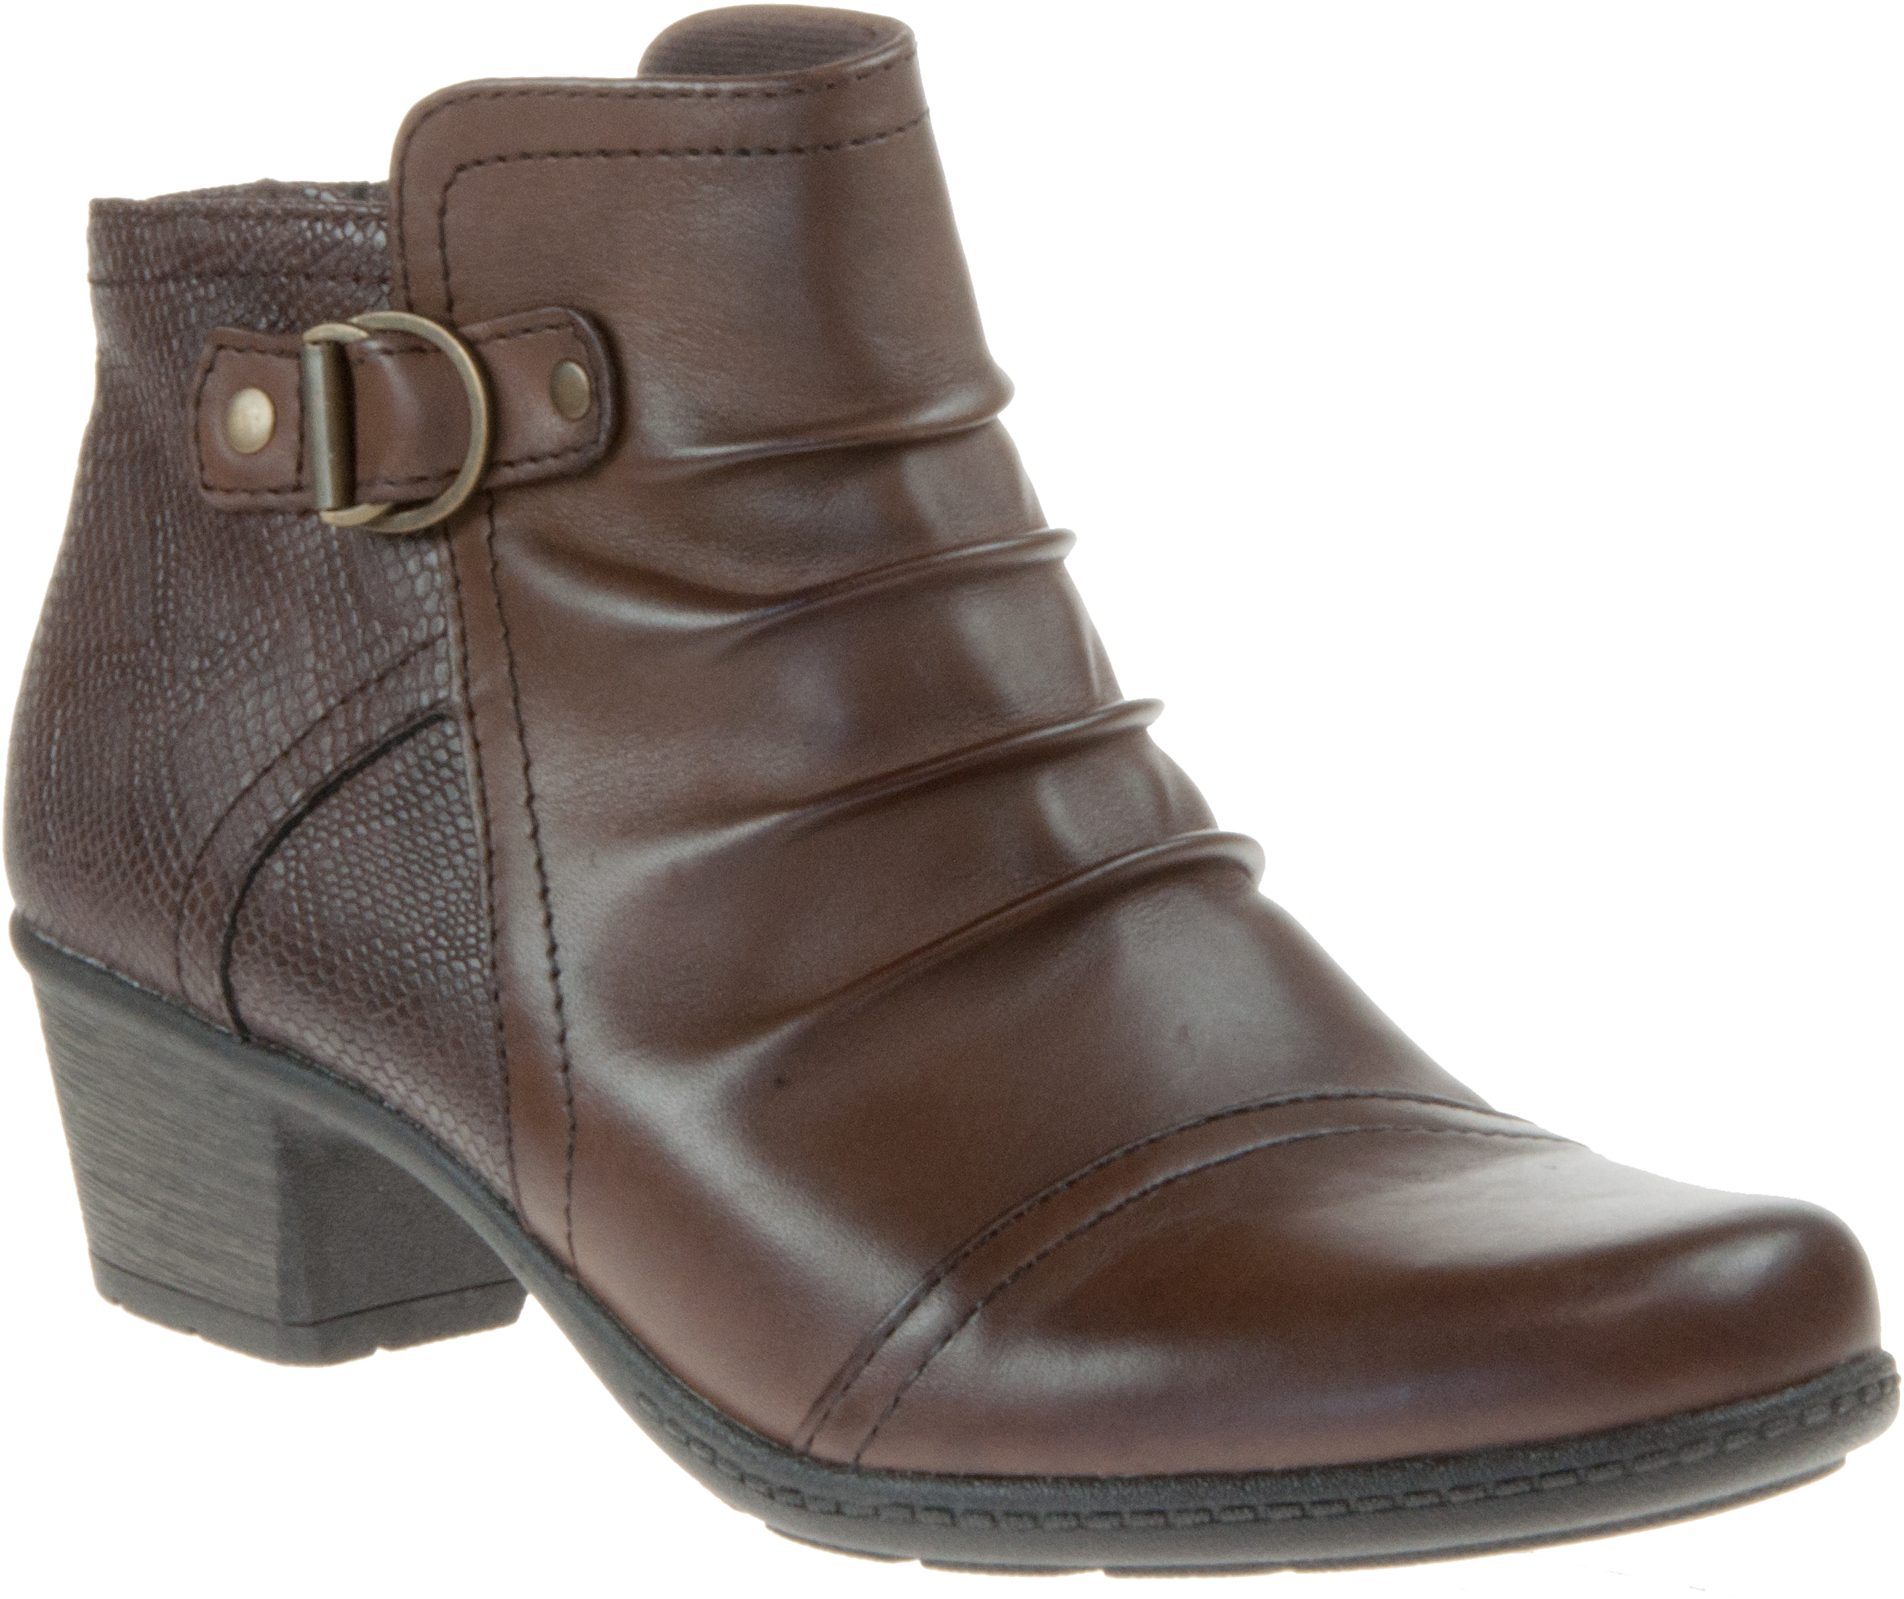 Earth Spirit Seymour Bark 30806 - Ankle Boots - Humphries Shoes